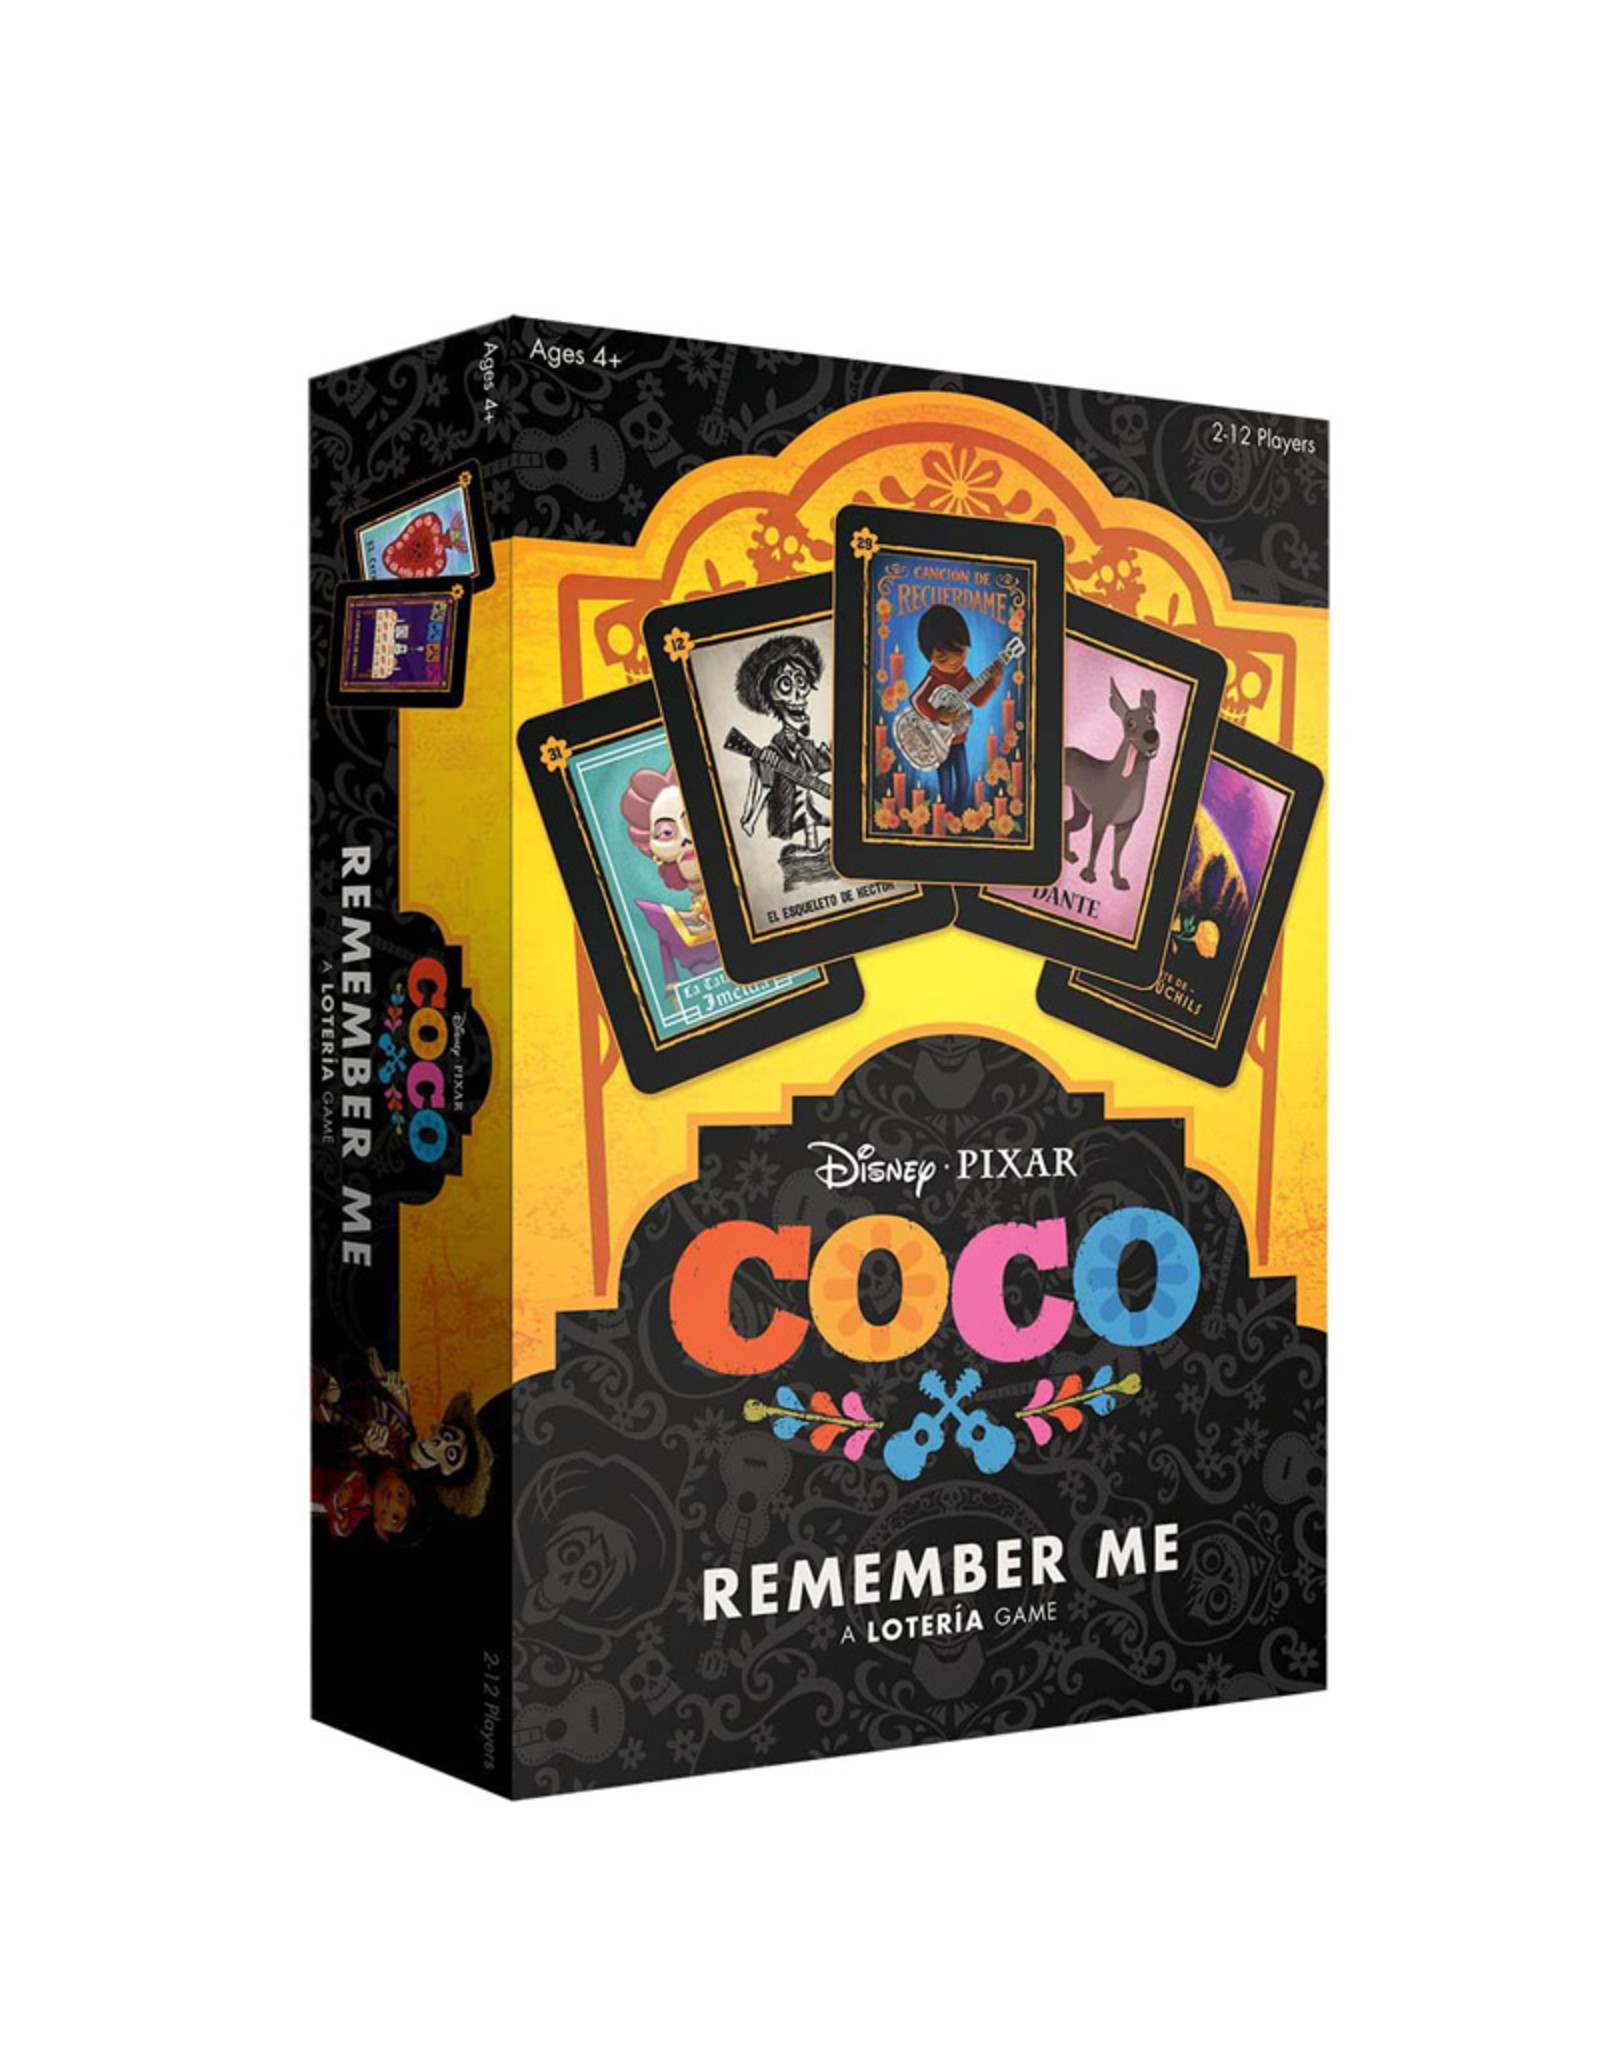 Usaopoly Coco: Remember Me - A Loteria Game